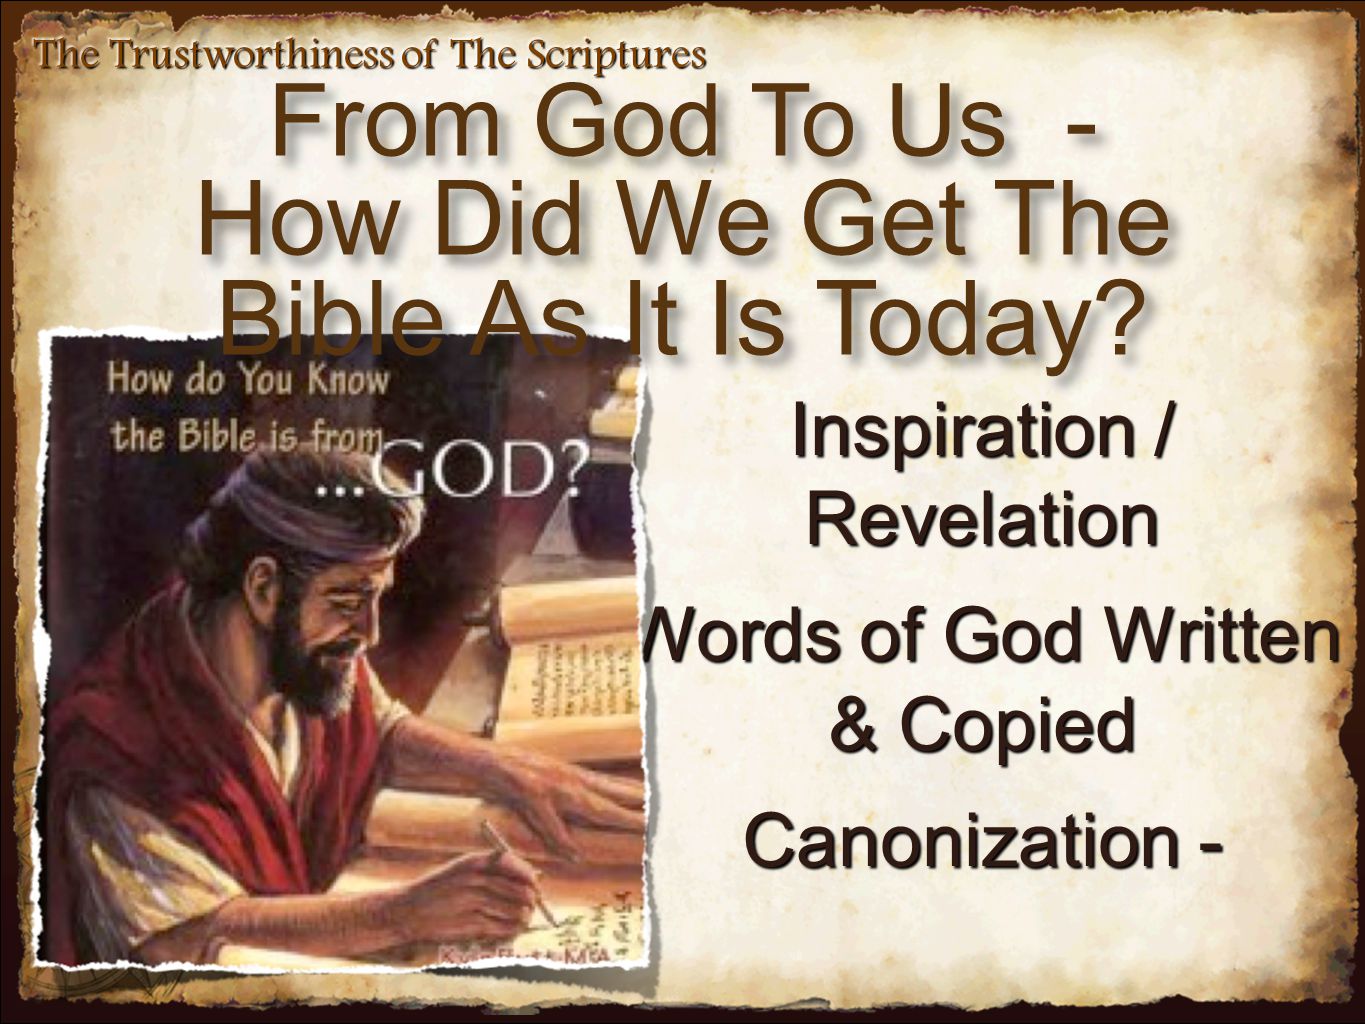 The Trustworthiness of The Scriptures Inspiration / Revelation Words of God Written & Copied Canonization - From God To Us - How Did We Get The Bible As It Is Today.